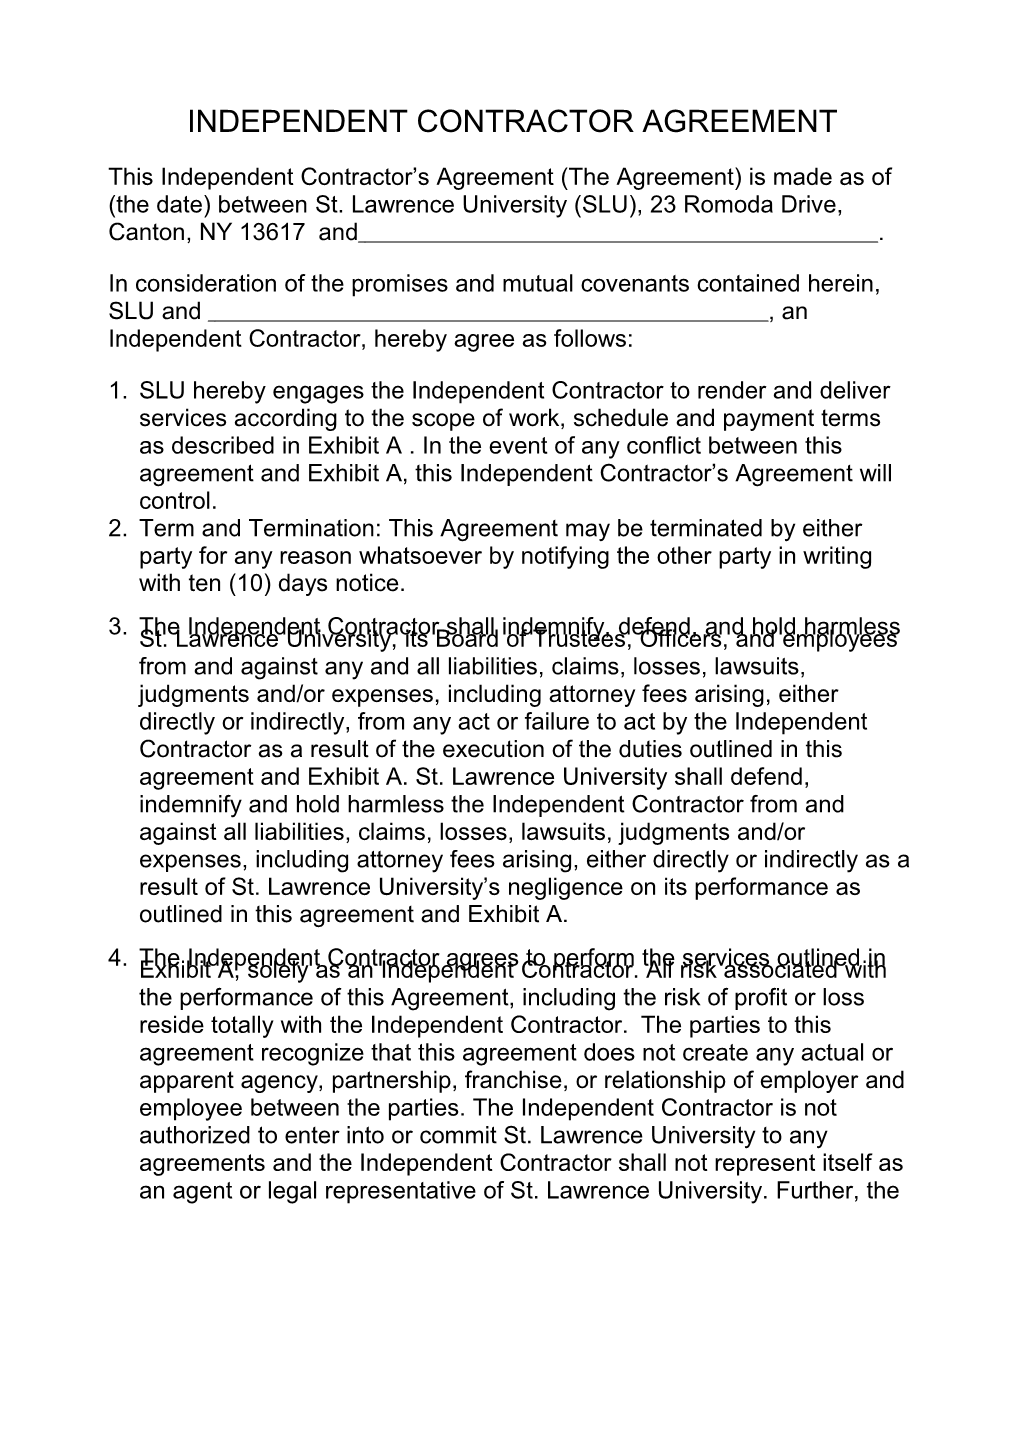 Independent Contractor Agreement s4